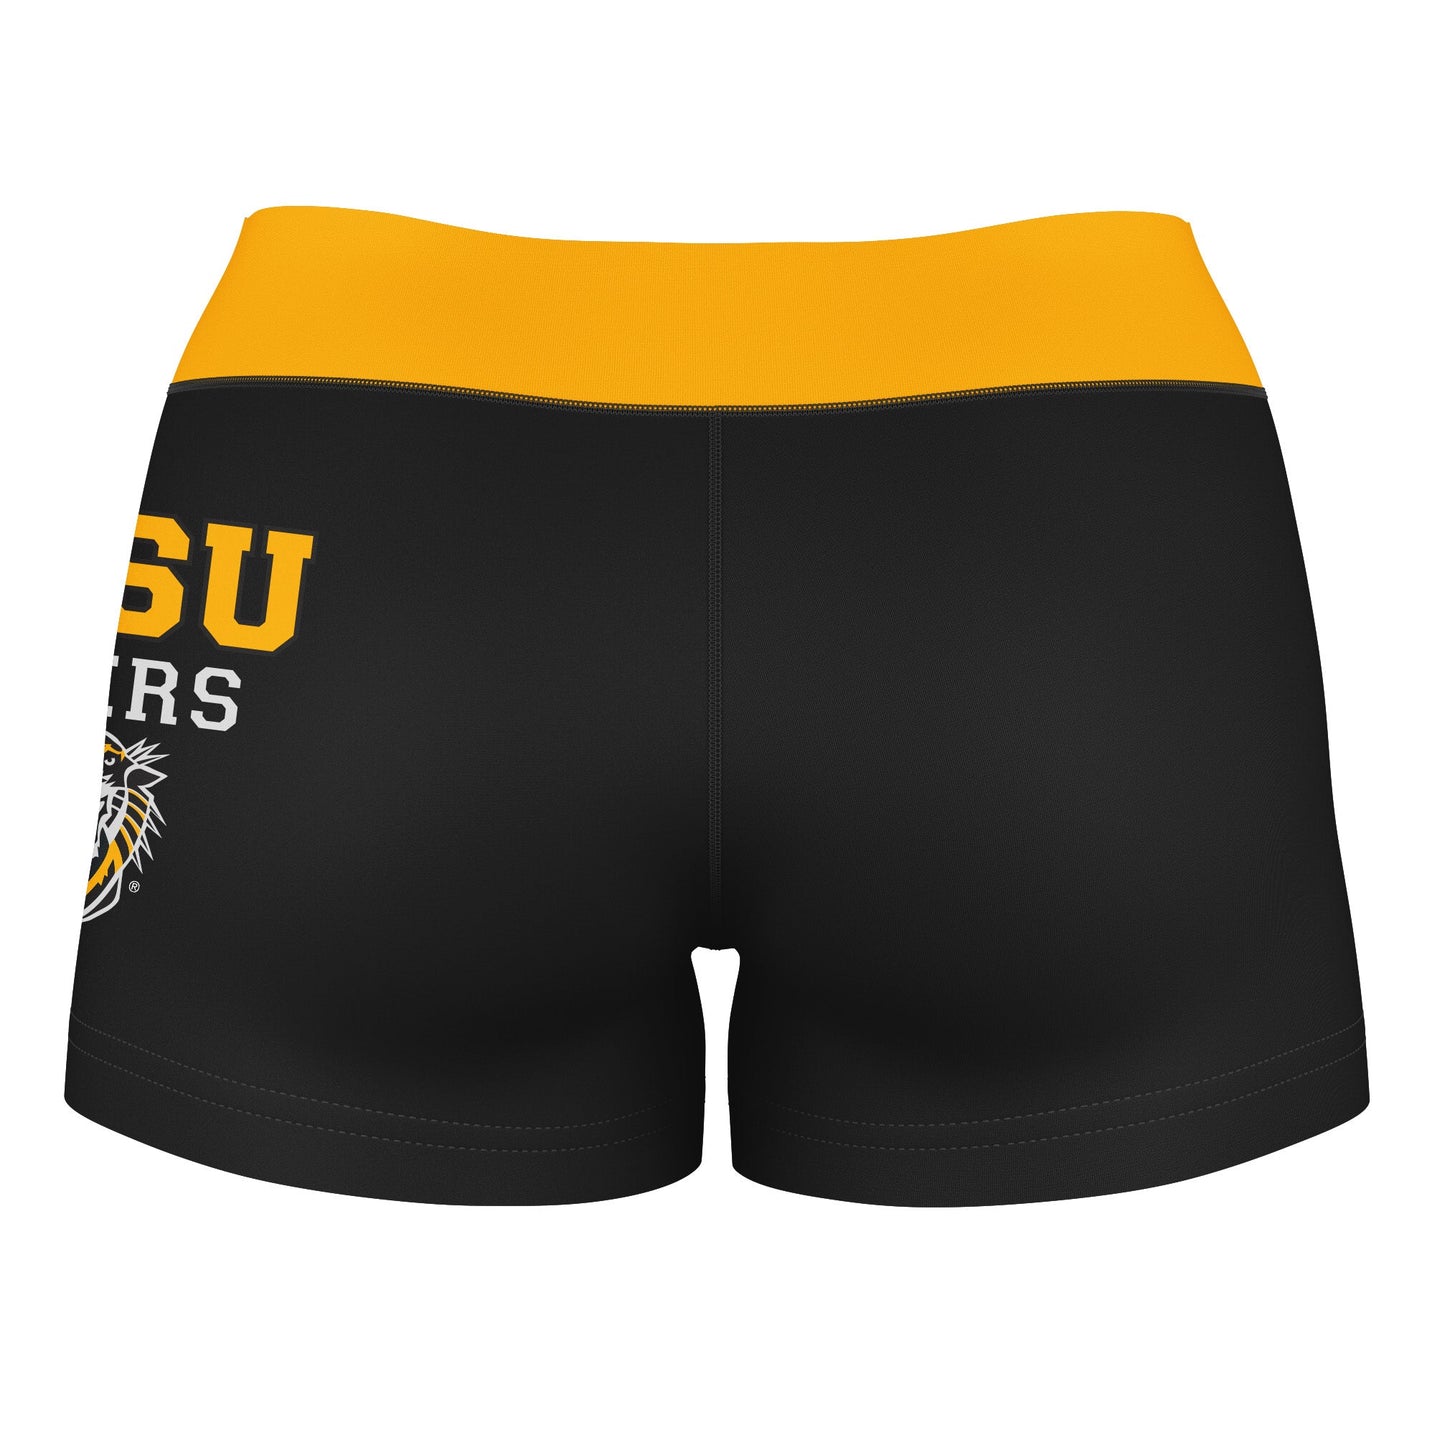 FHSU Tigers Vive La Fete Game Day Logo on Thigh and Waistband Black & Gold Women Yoga Booty Workout Shorts 3.75 Inseam" - Vive La F̻te - Online Apparel Store